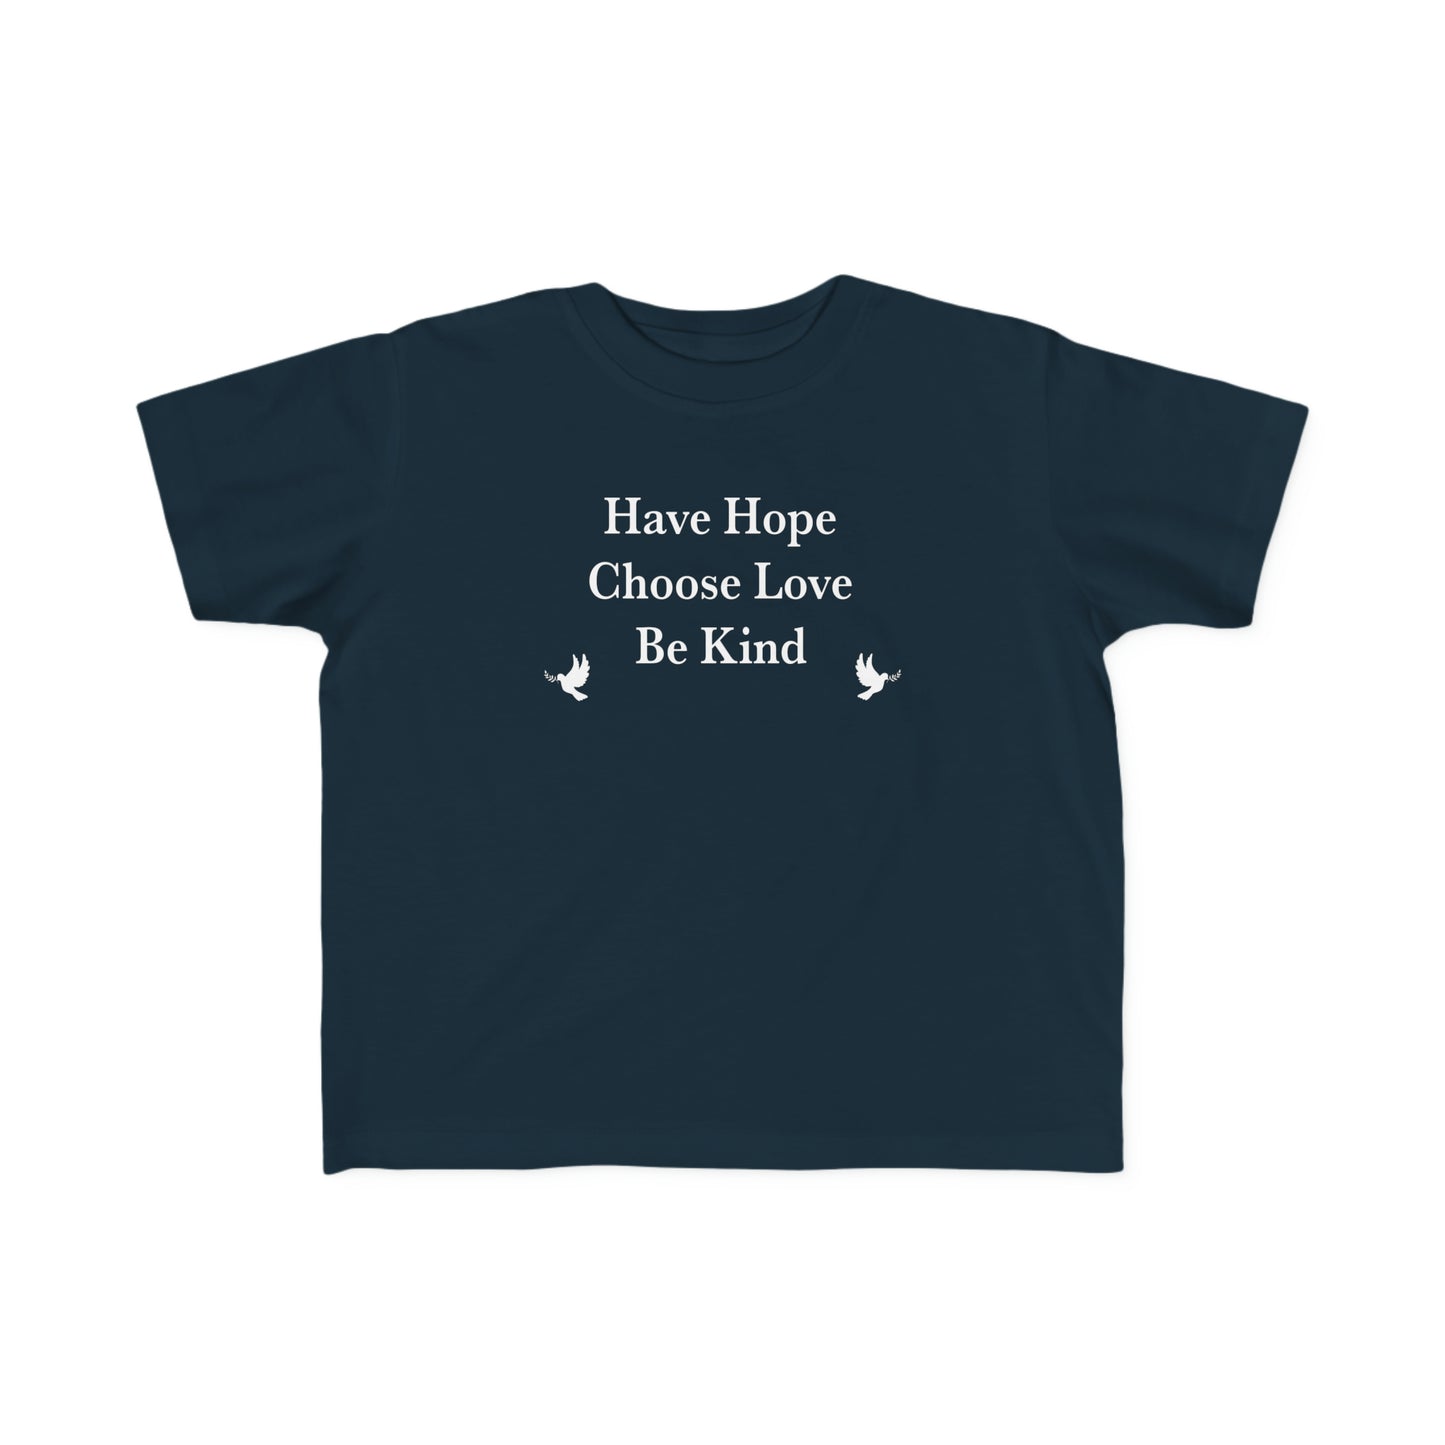 “Have Hope ~ Choose Love ~ Be Kind” Toddler's Tee